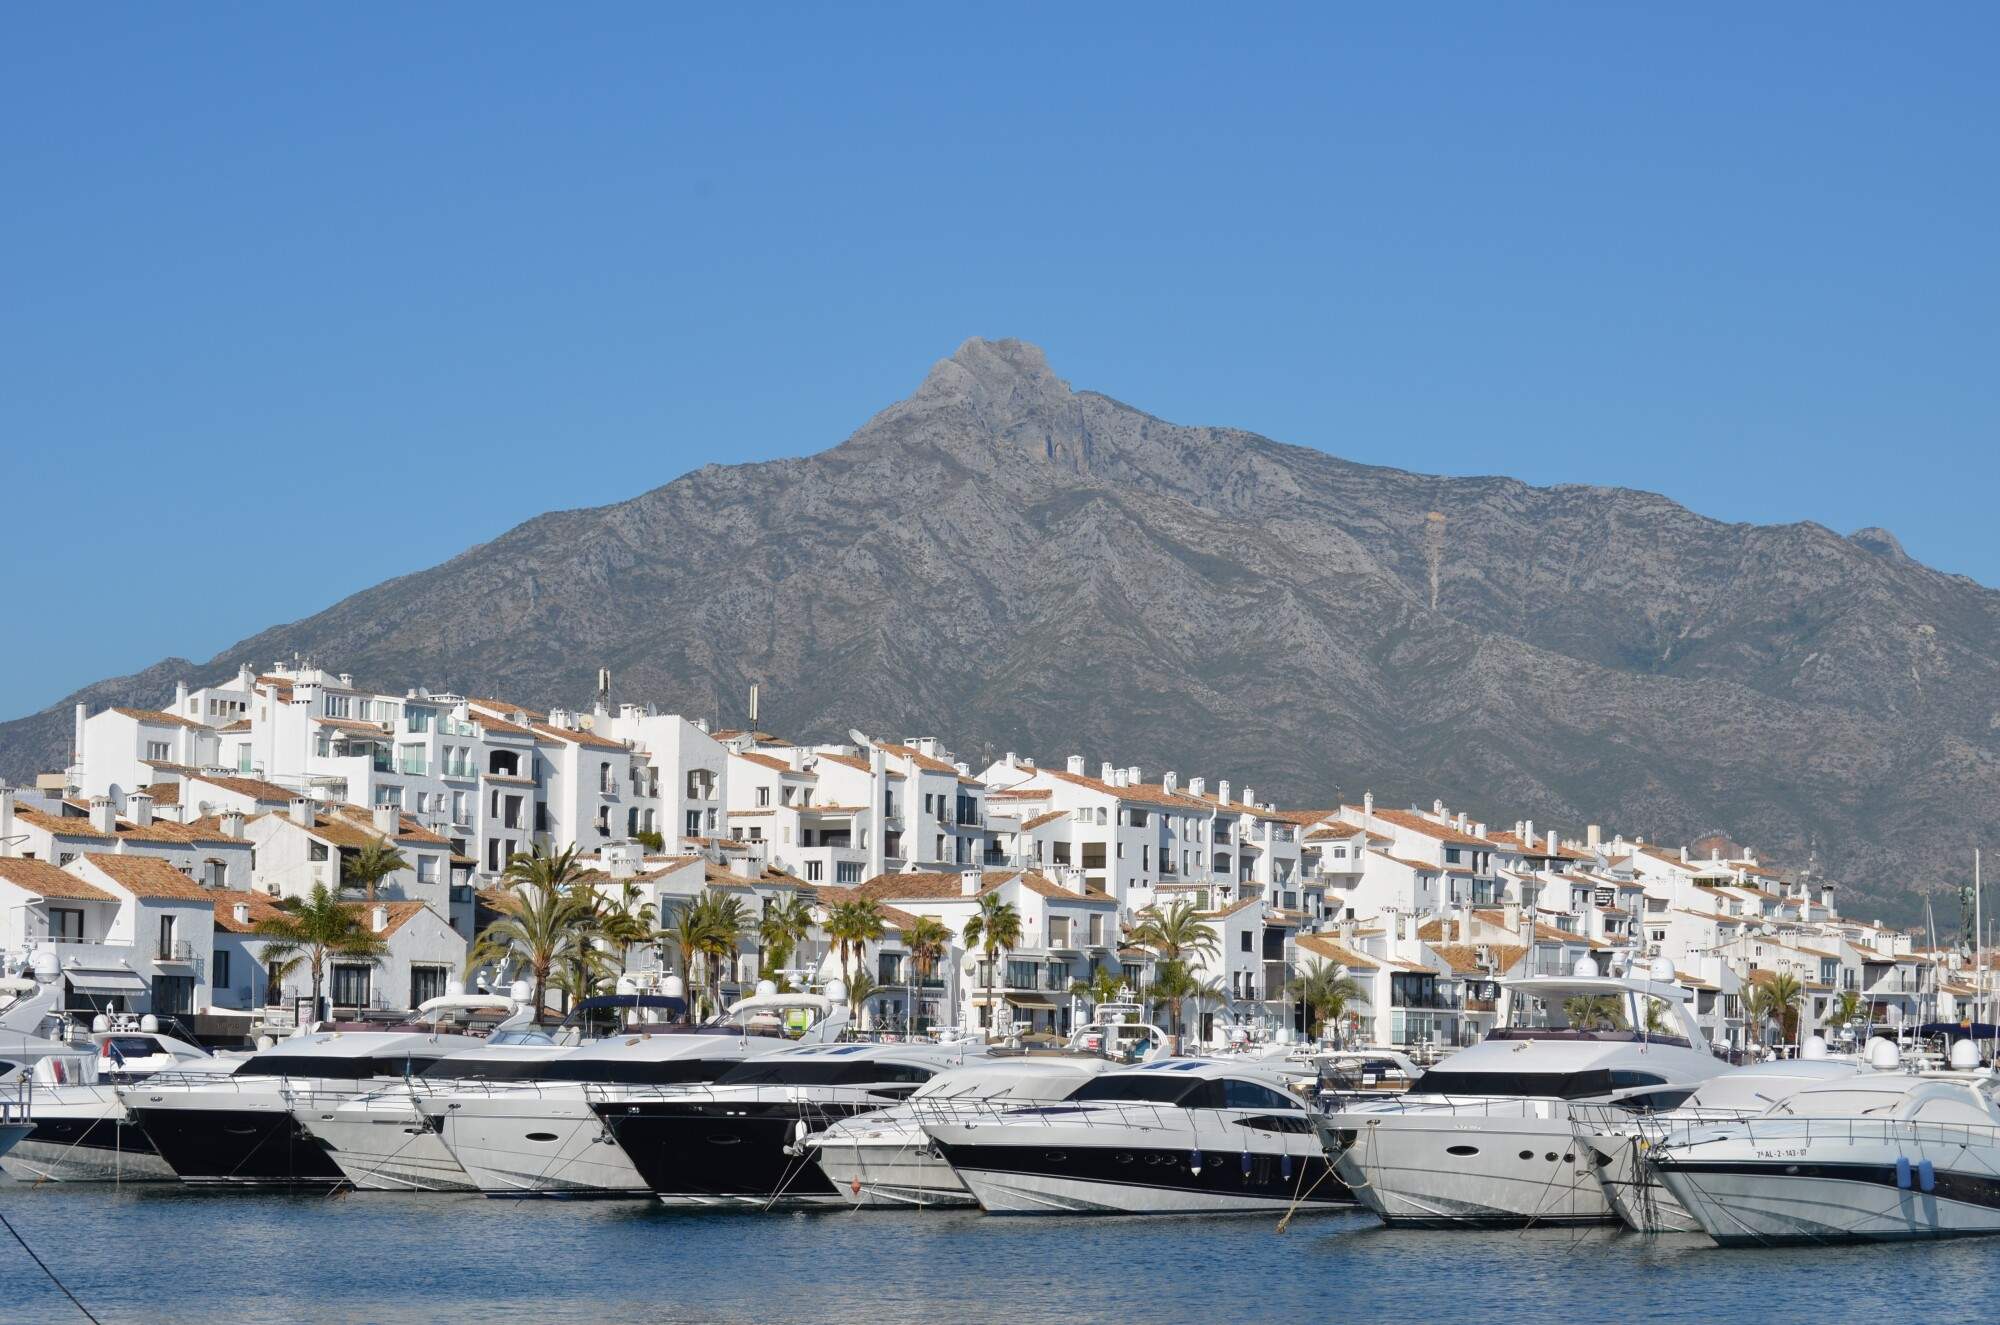 3 Things to Think About When Looking at Marbella Houses for Sale